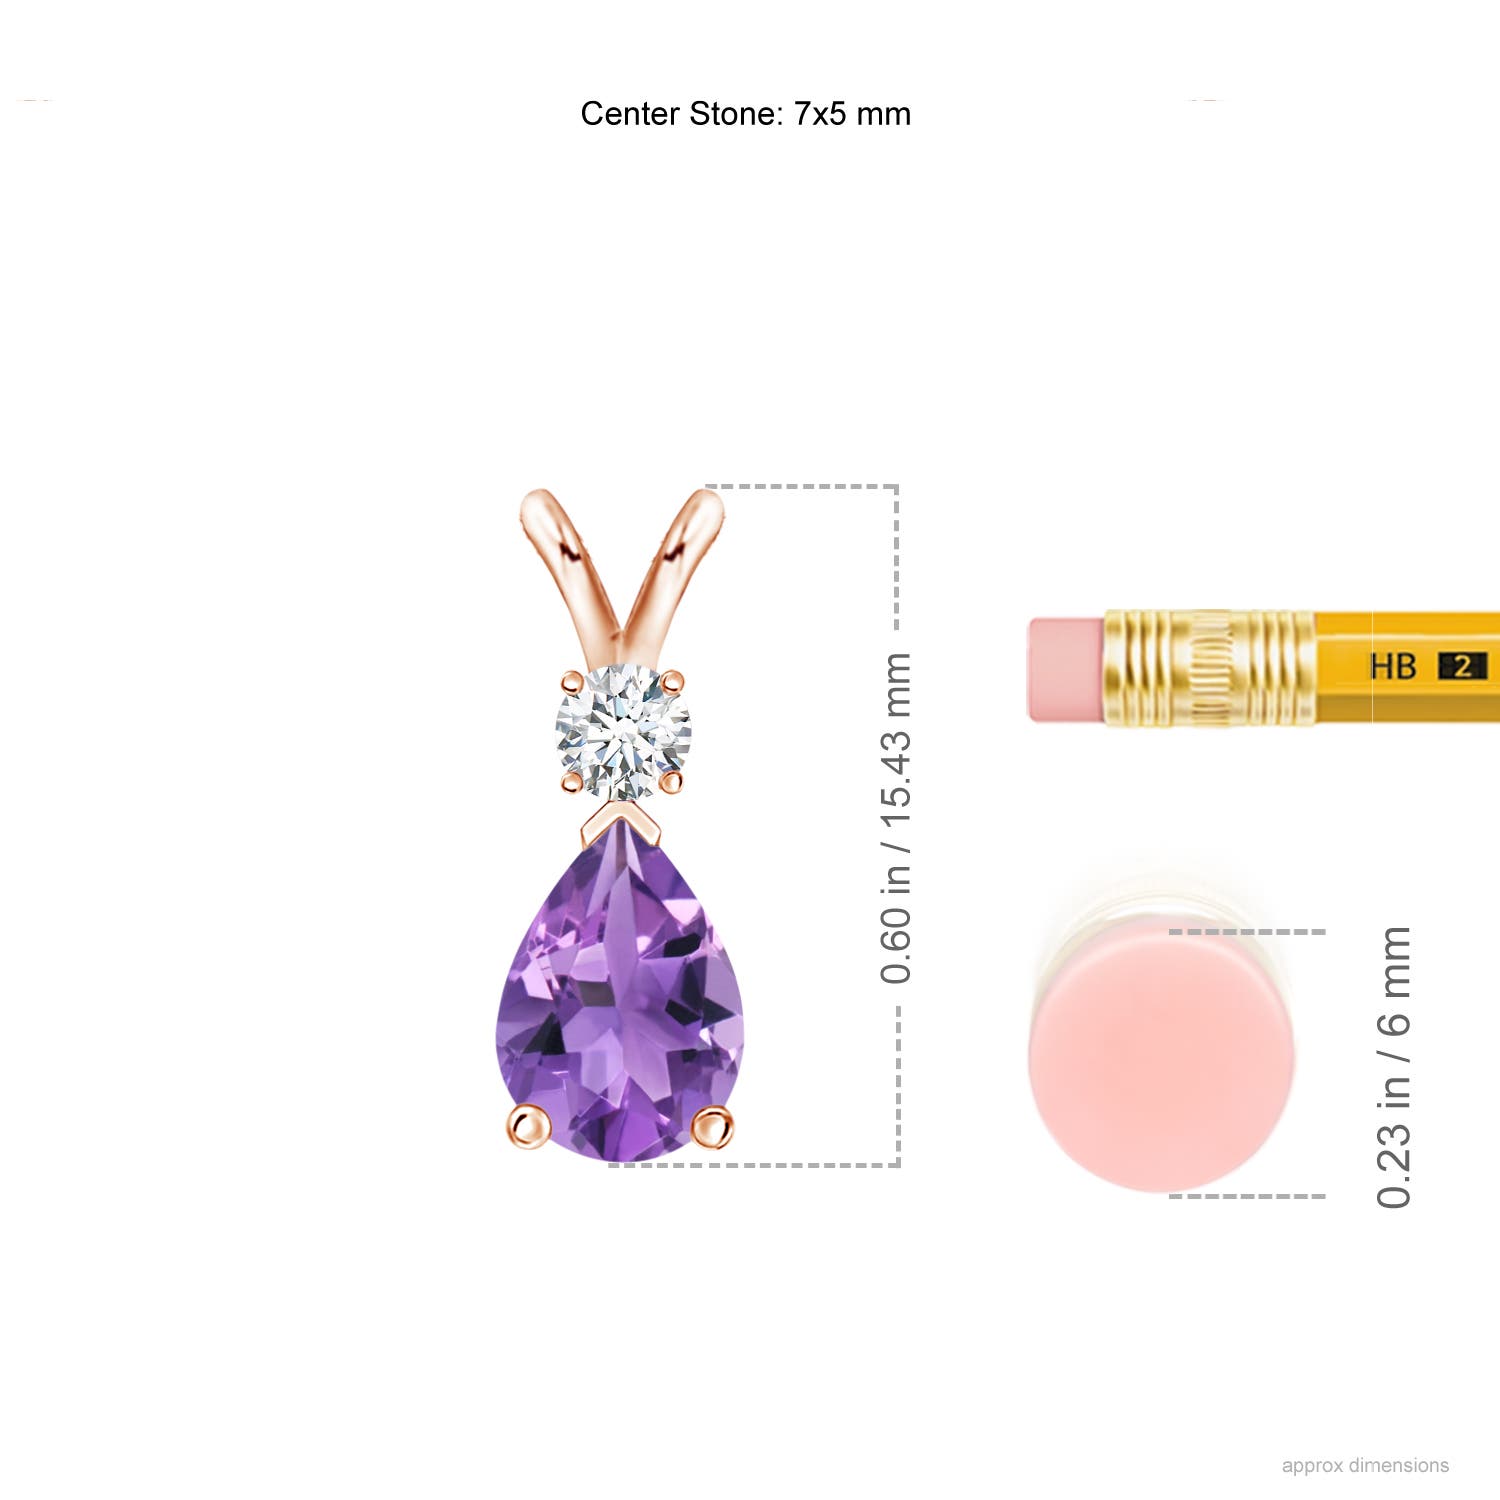 AA - Amethyst / 0.67 CT / 14 KT Rose Gold